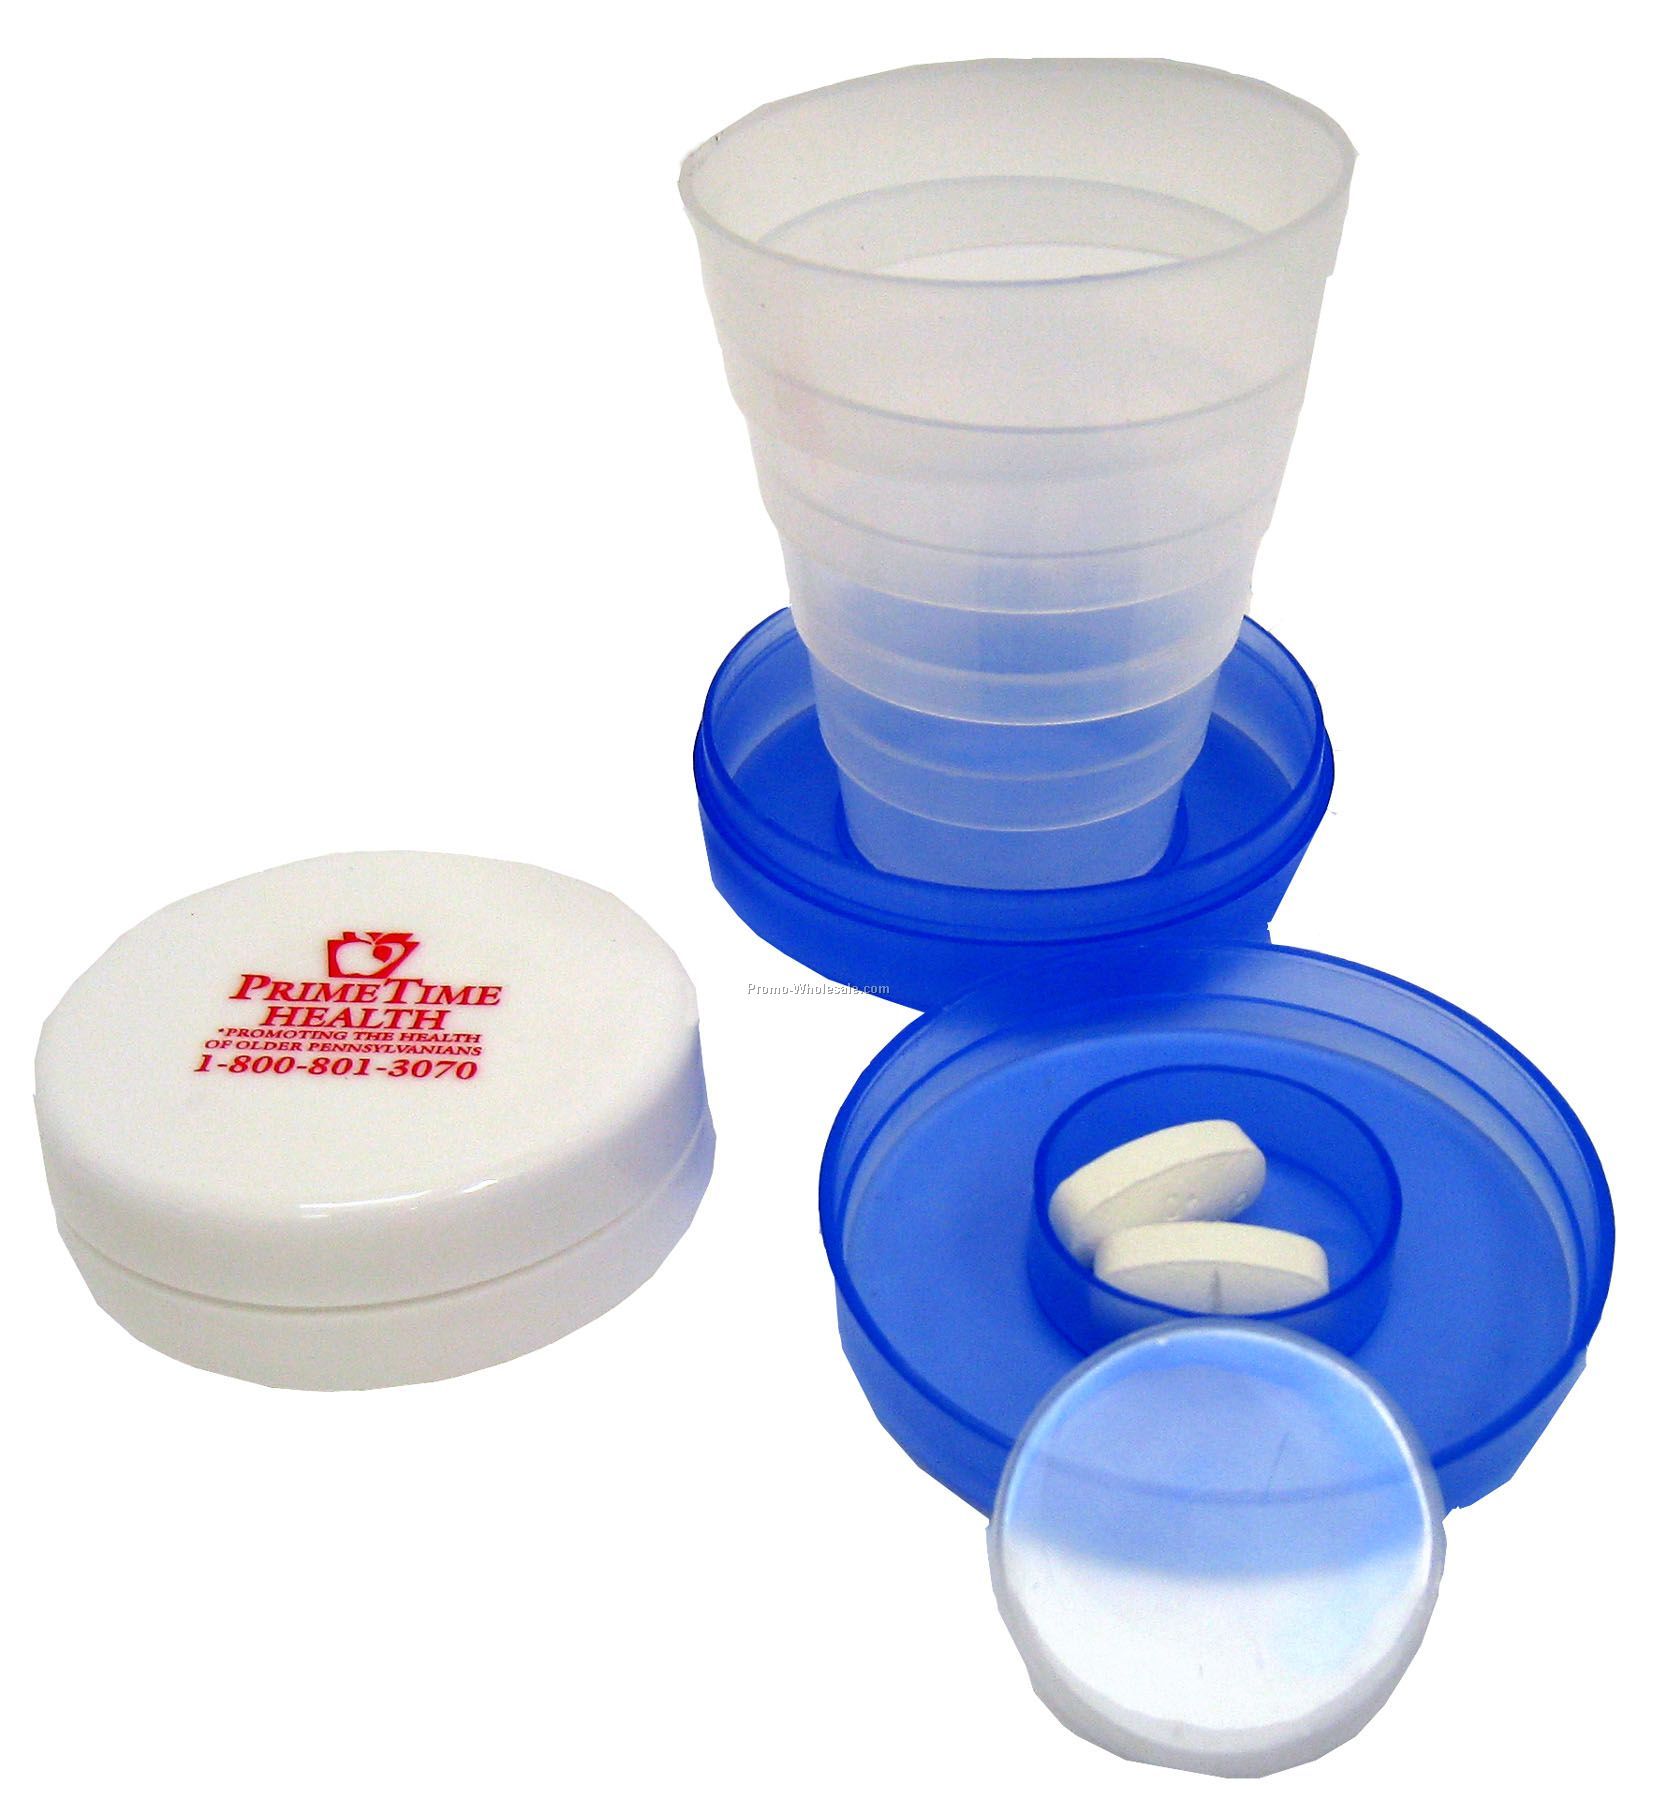 Collapsible Pill Box Cup 2-3/4"x1"